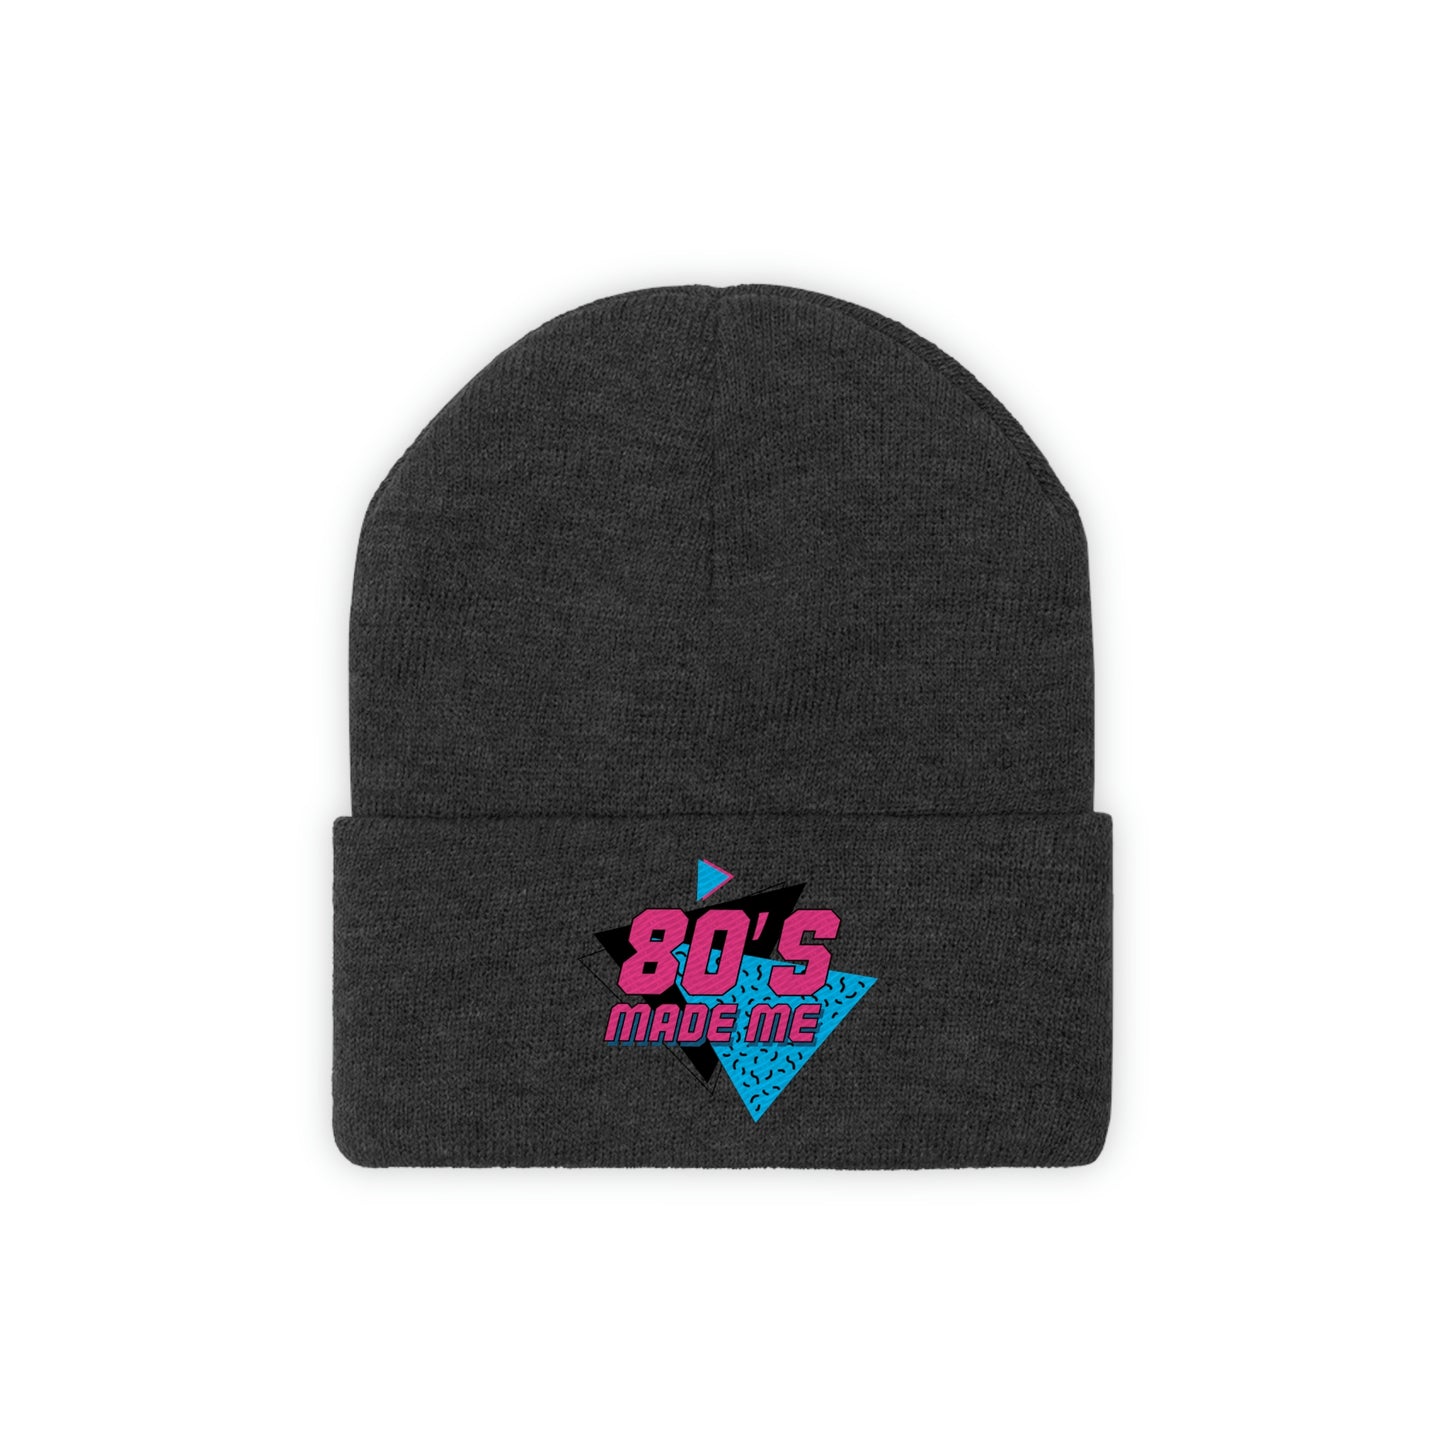 MADE IN THE 80S BEANIE